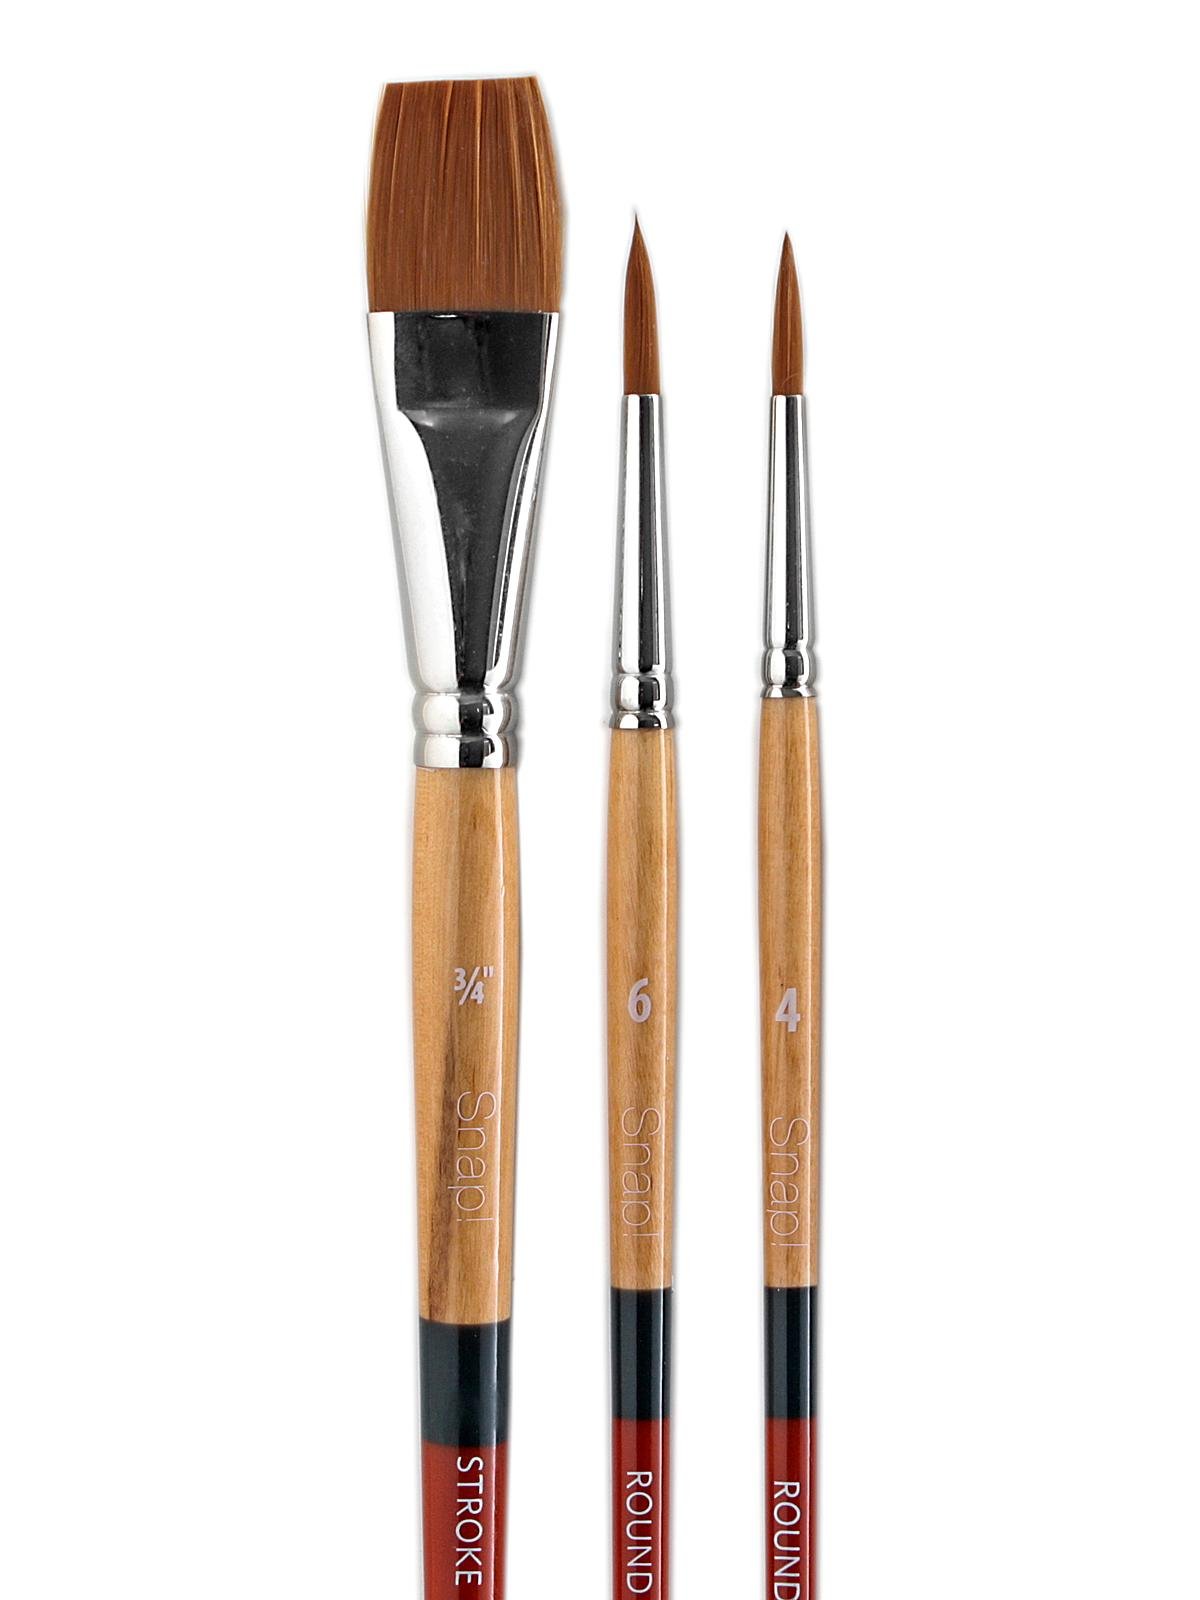 Princeton SNAP! Series 9800 and 9850 White Soft Synthetic Brushes and Set